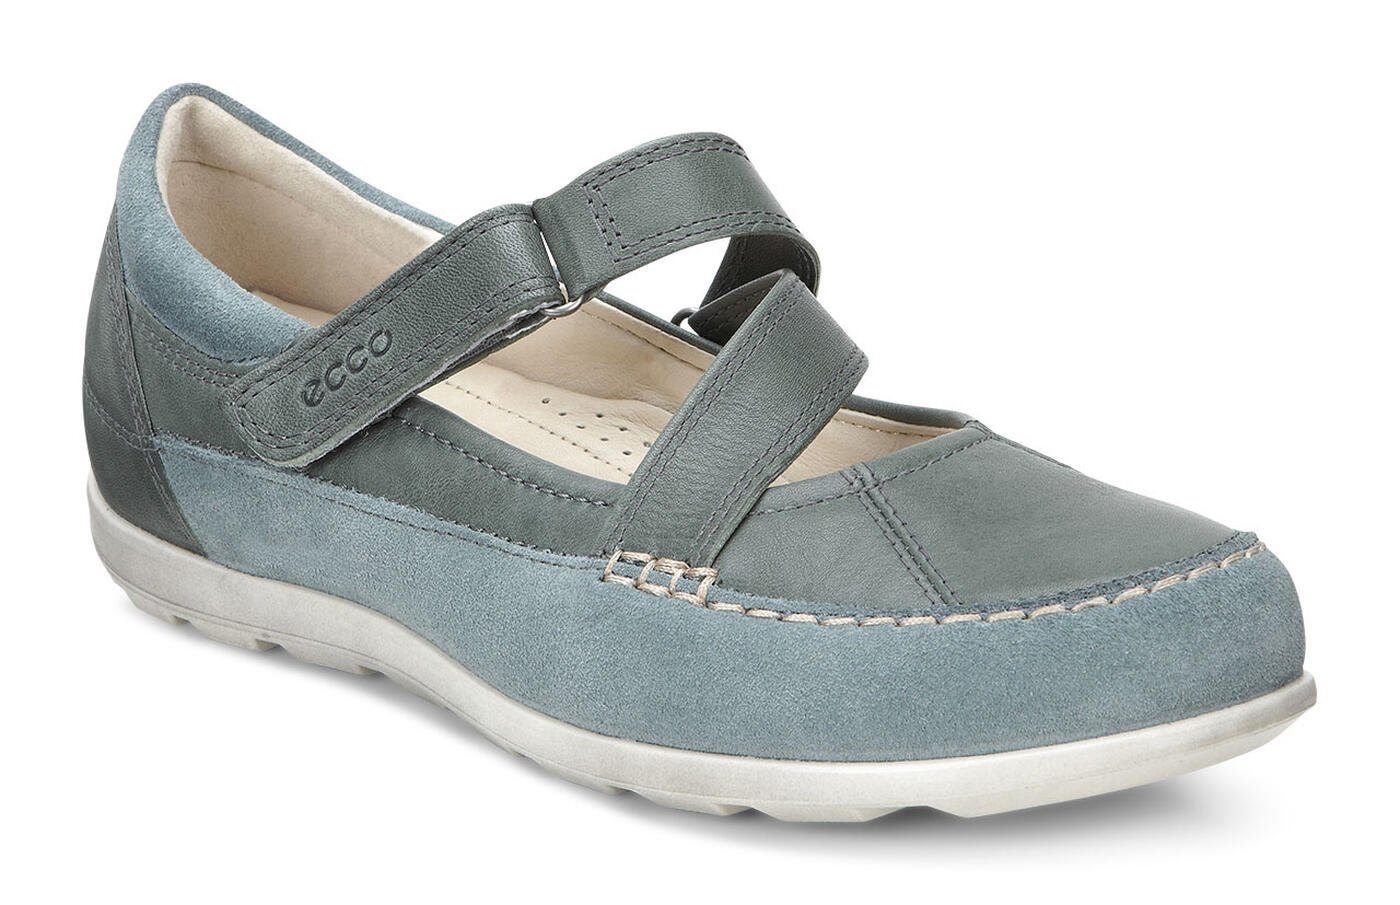 ECCO Cayla Mary Jane | Women's Shoes | ECCO® Shoes